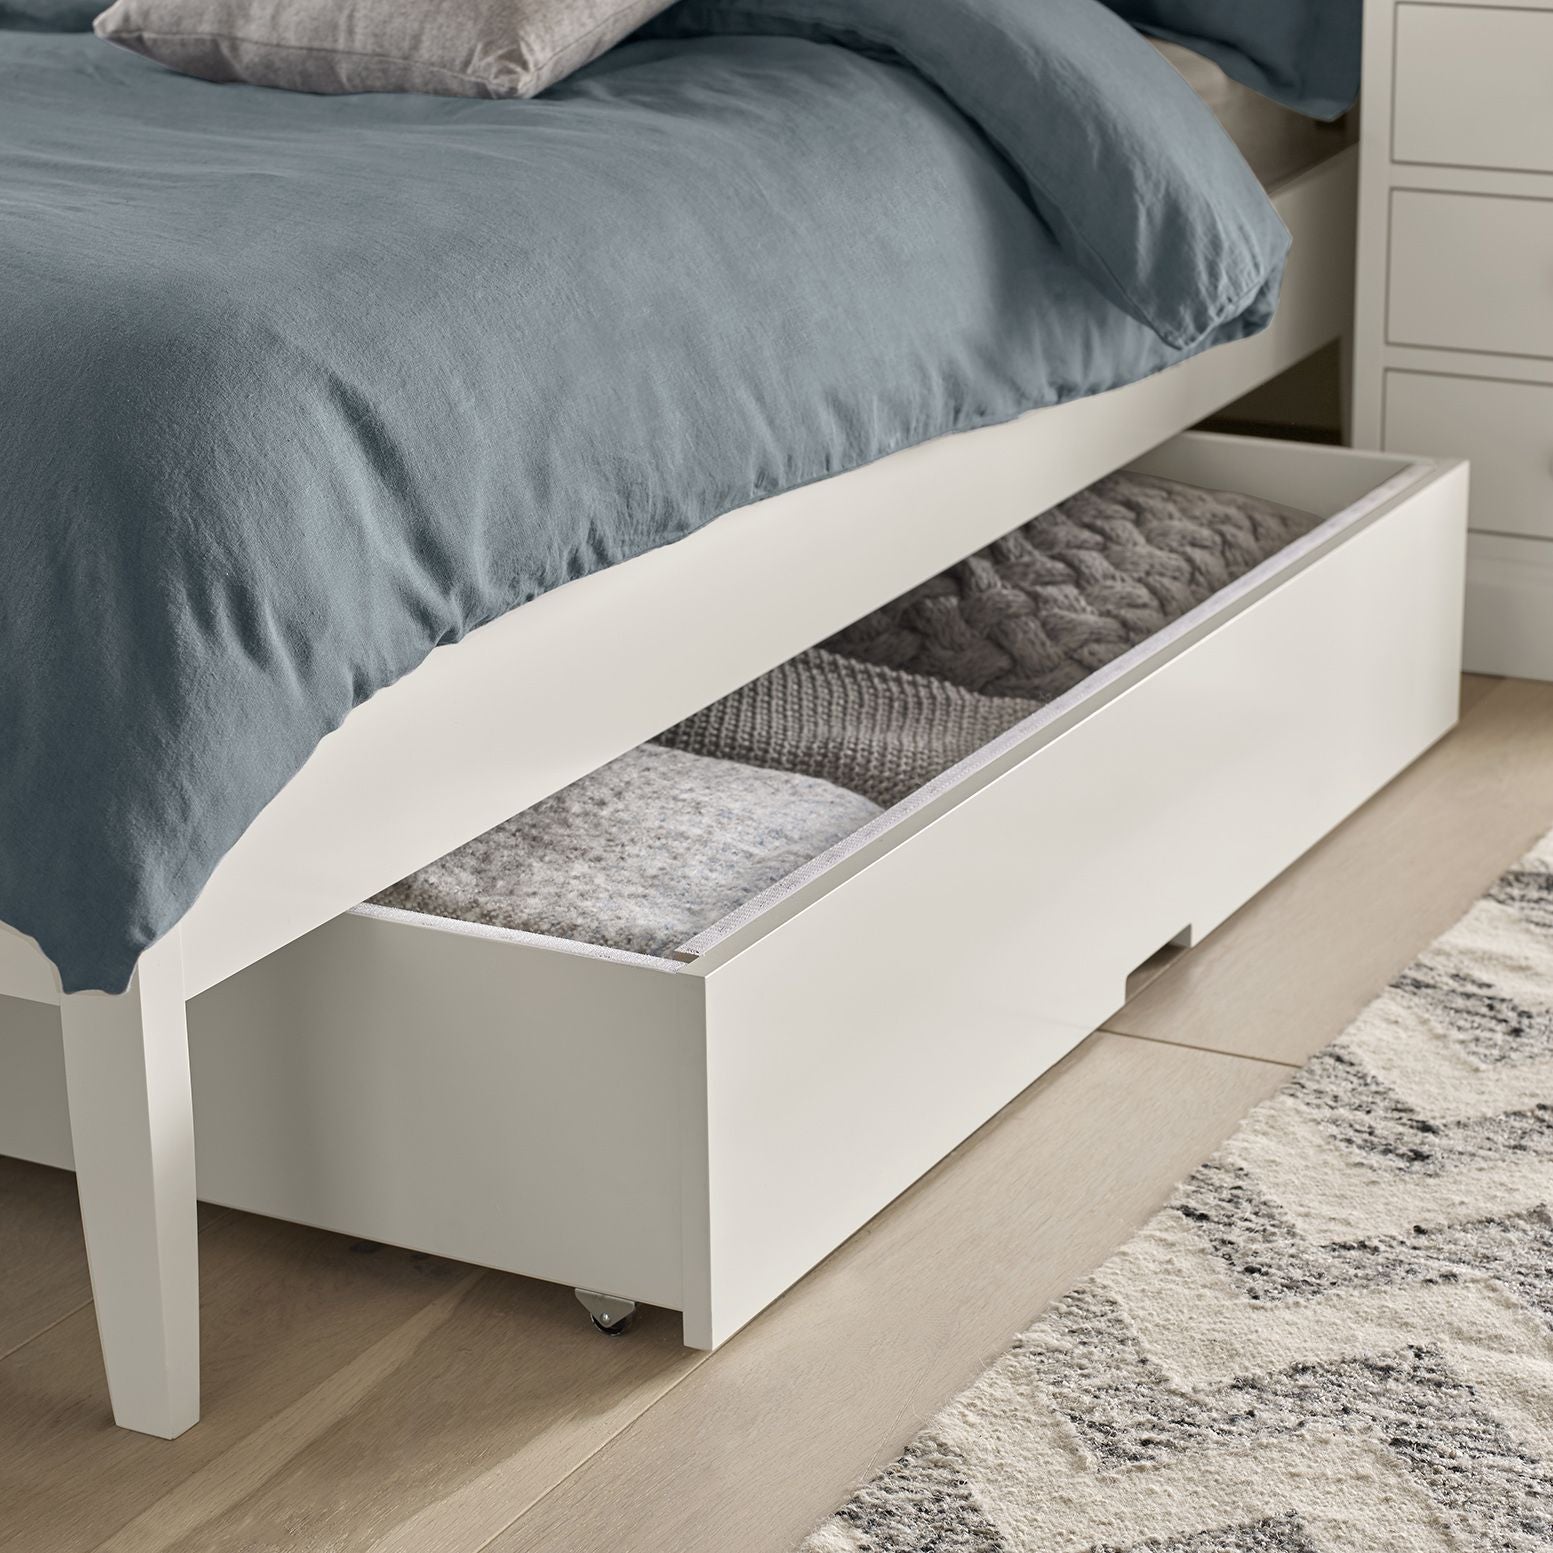 Ashby White 4ft Small Double Bed Frame from Upstairs Downstairs Furniture in Lisburn, Monaghan and Enniskillen | bedframe